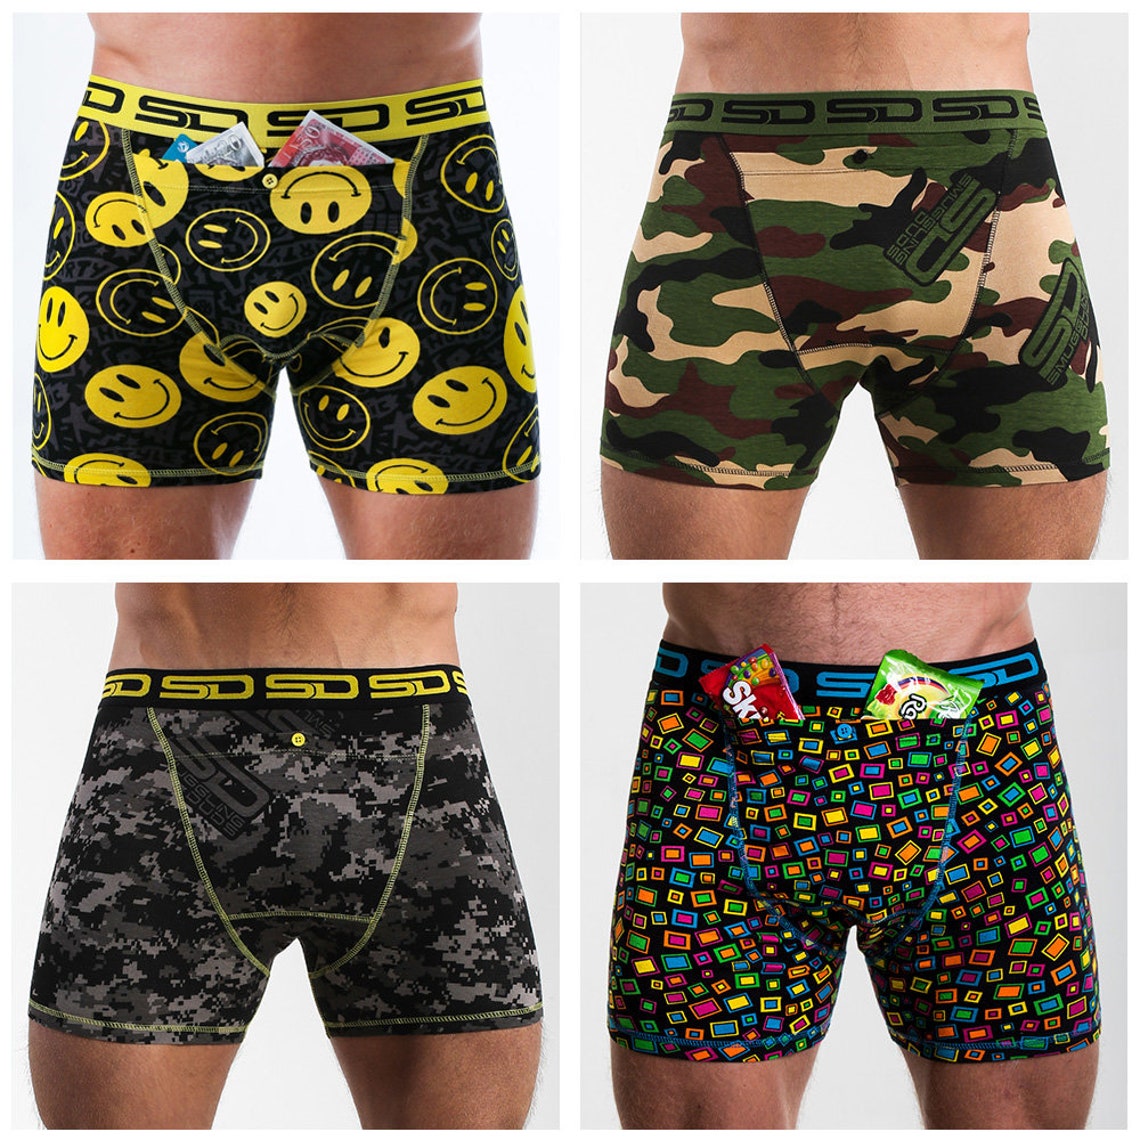 Smuggling Duds Core Collection Stash Boxers 4 Pack - Etsy